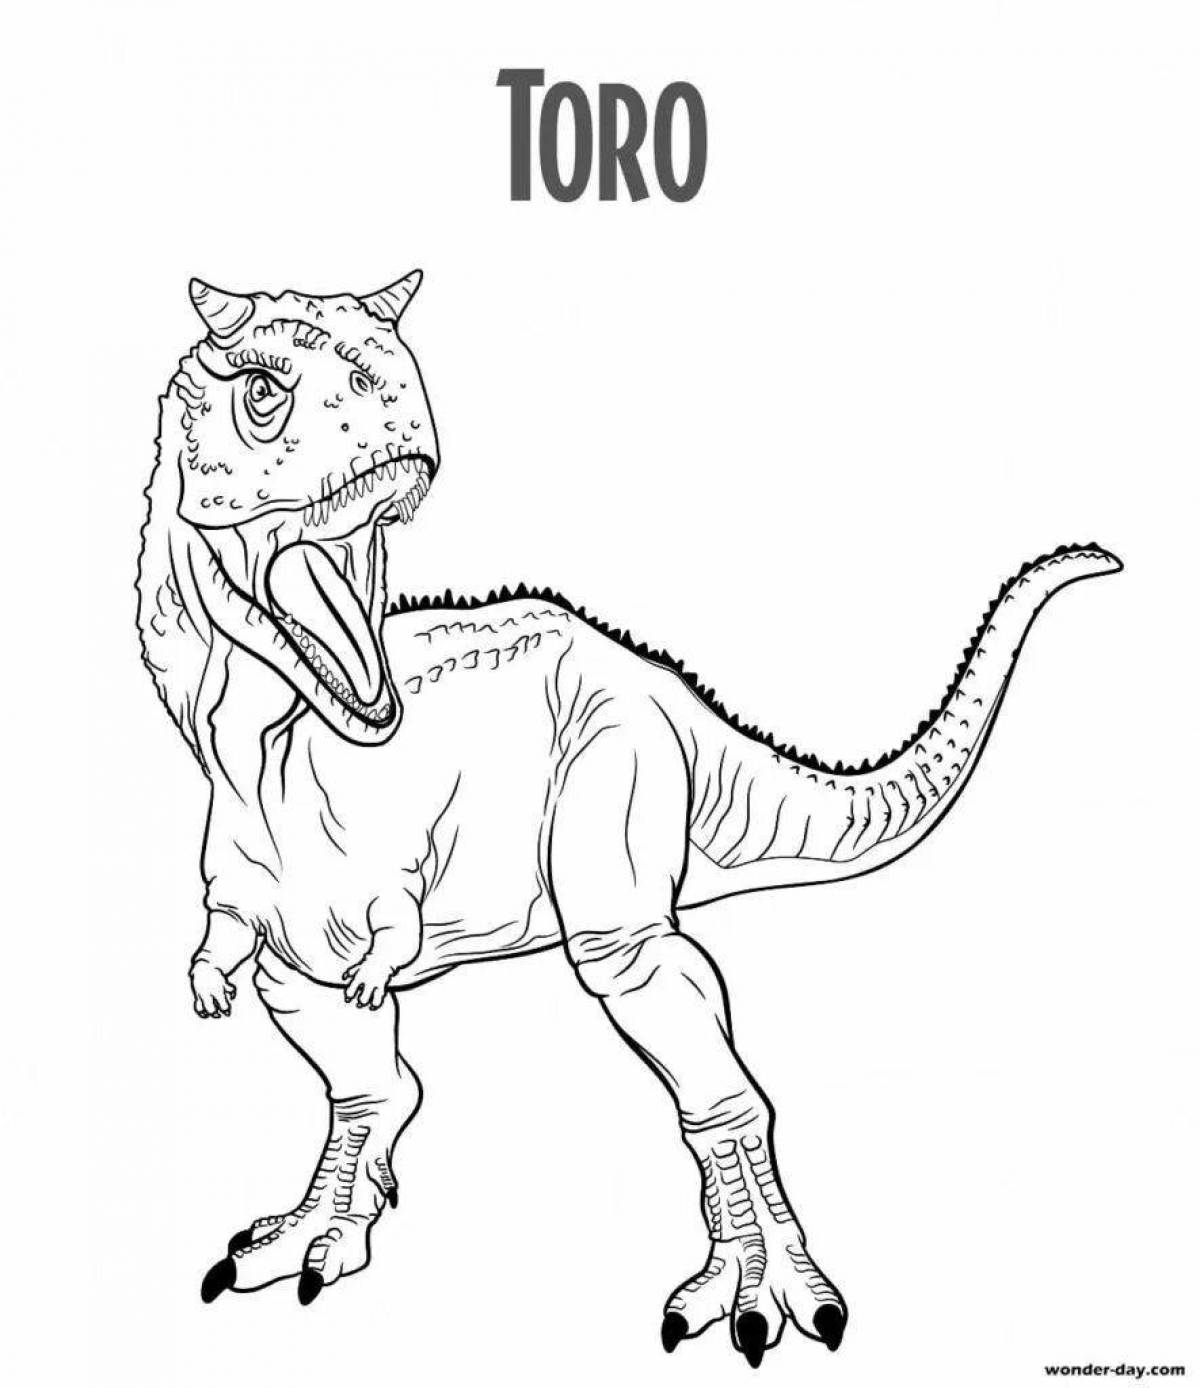 Jurassic world domination flawless coloring page